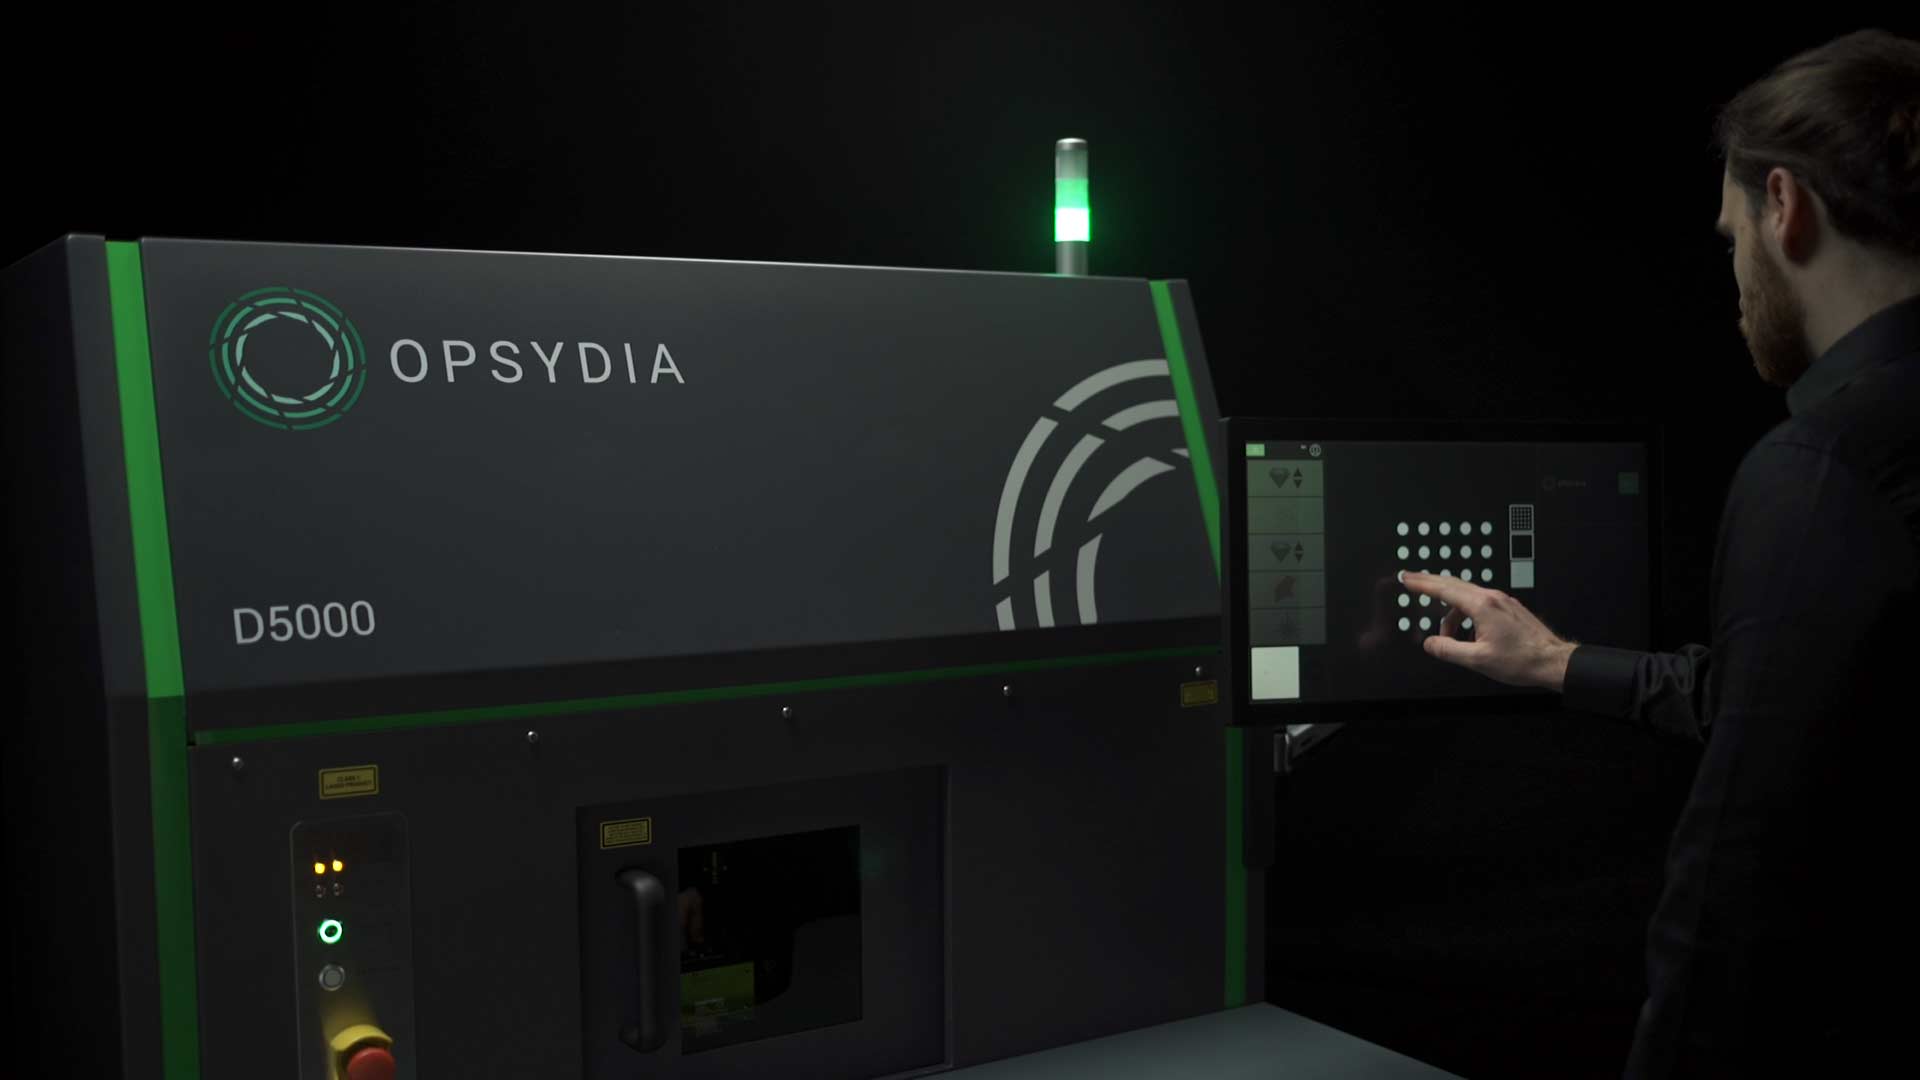 Using the Opsydia System with a touch-screen computer interface